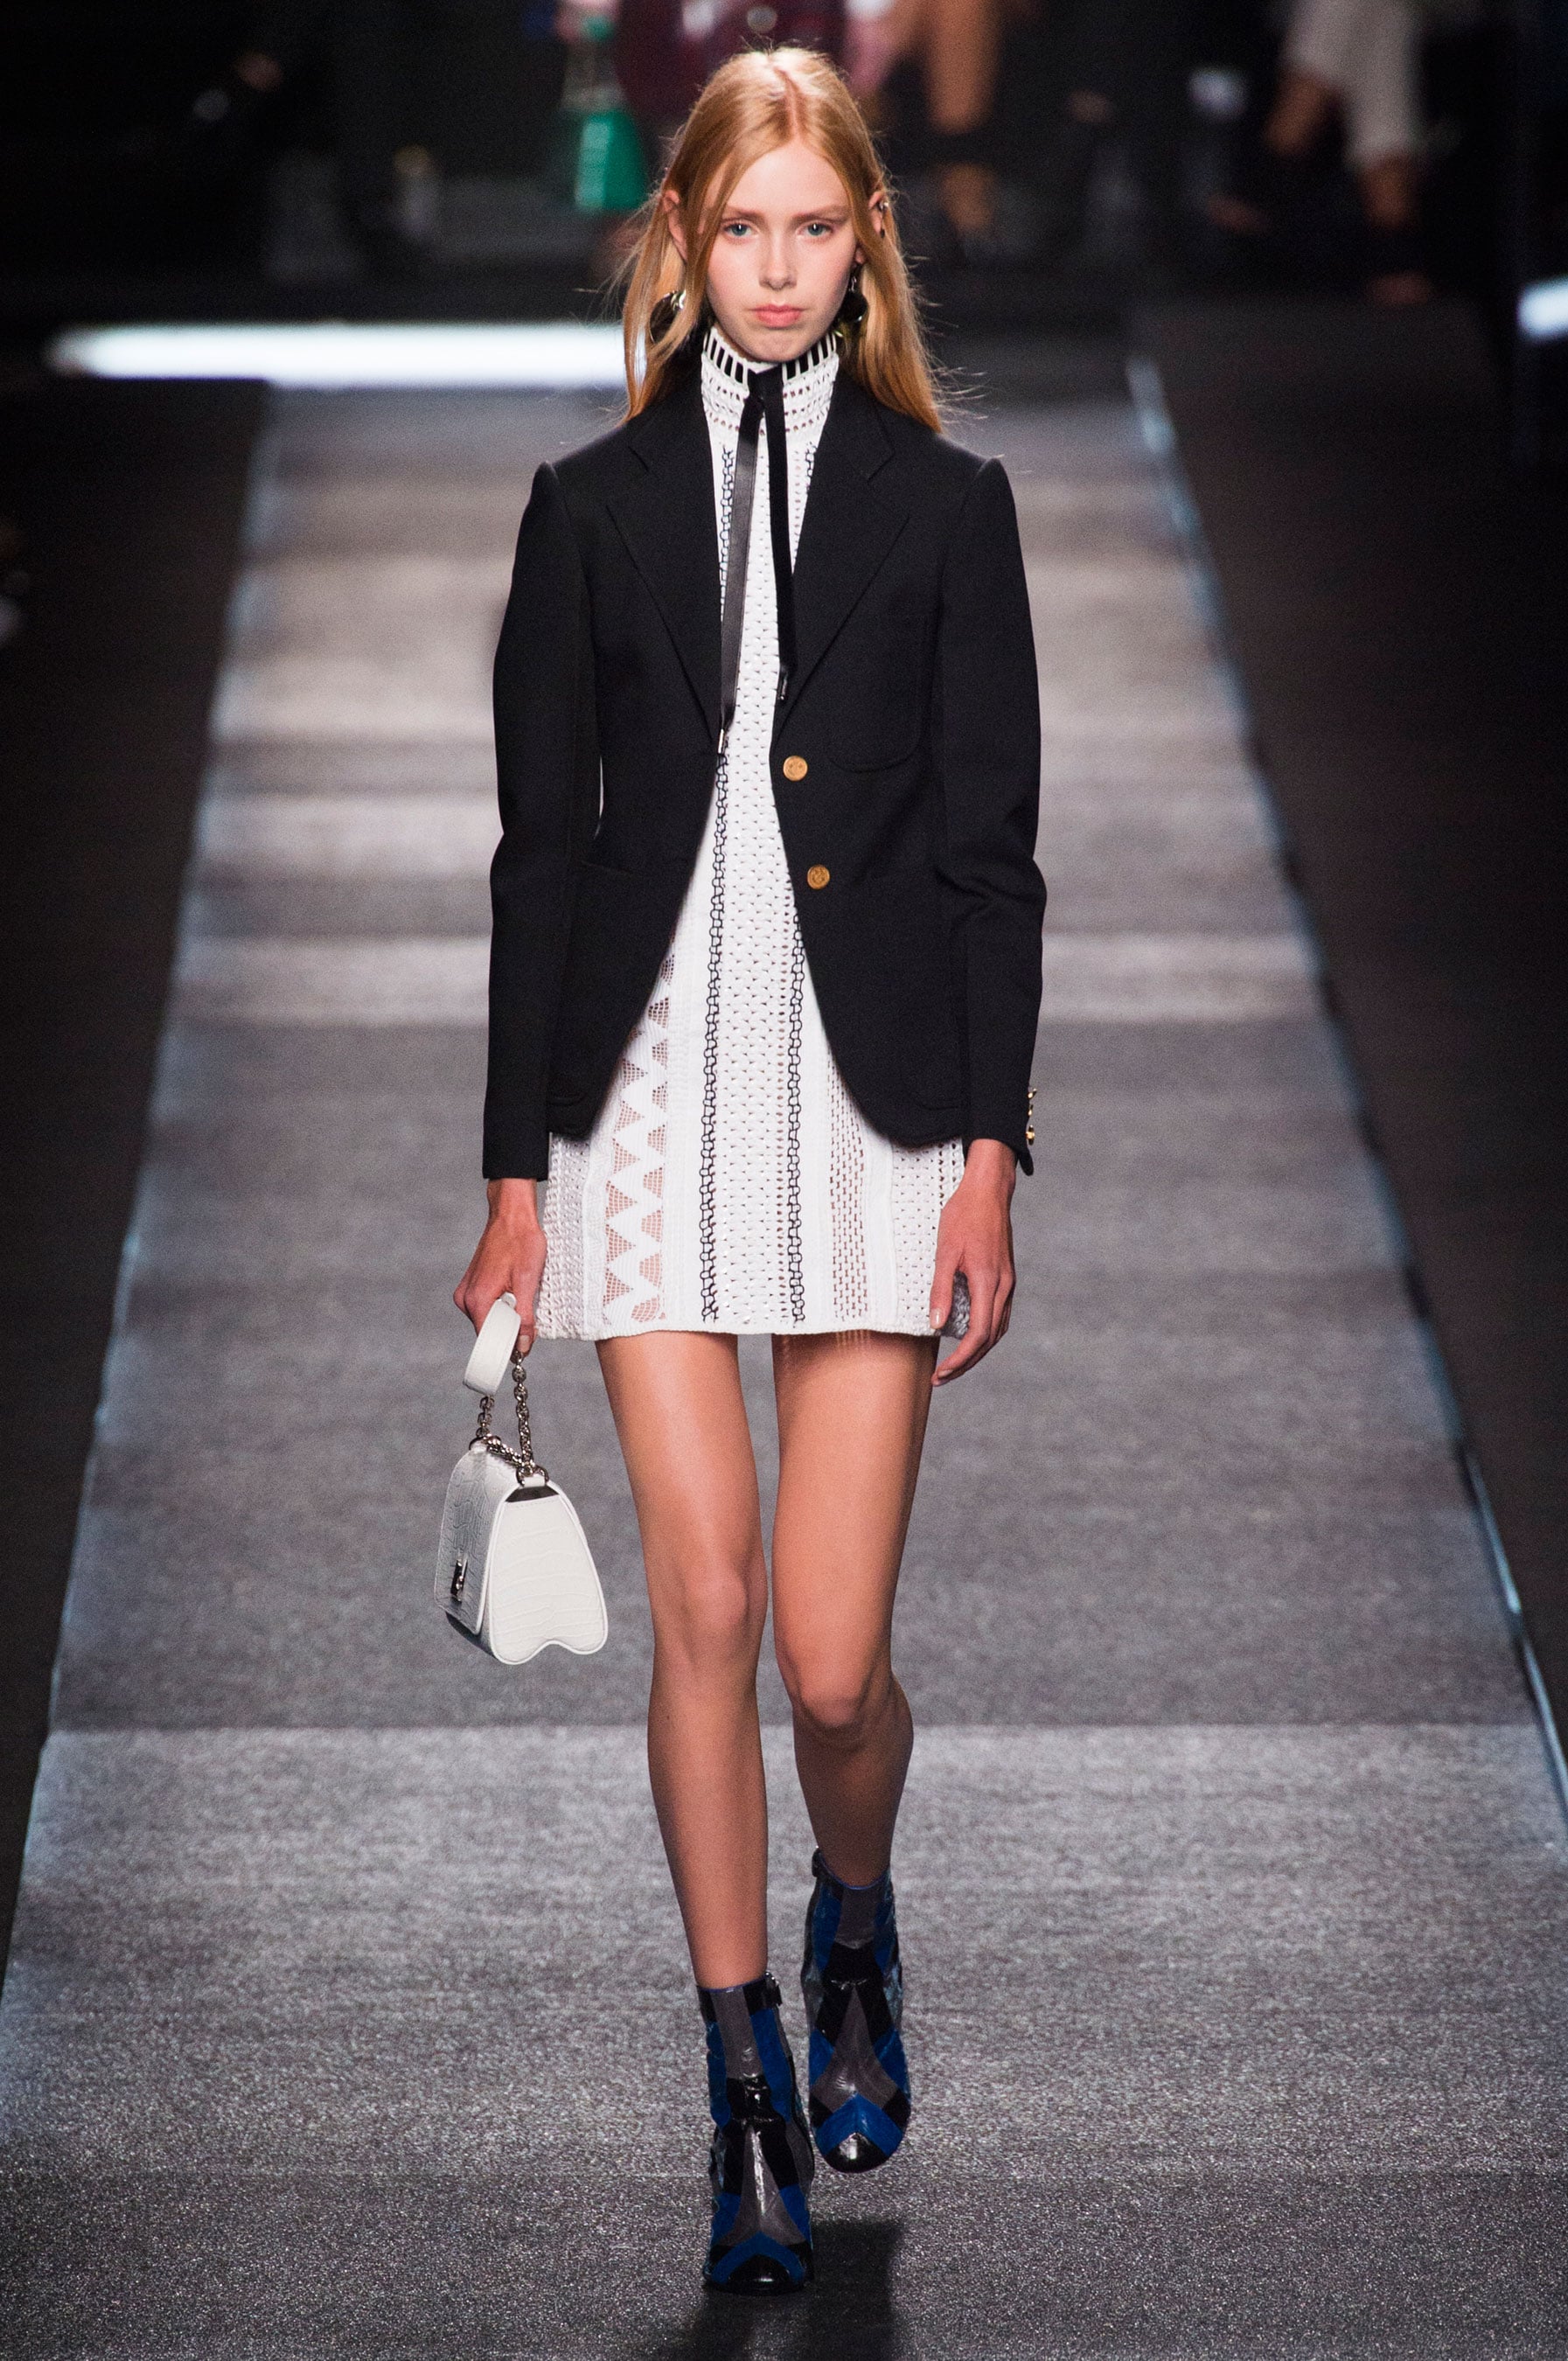 Louis Vuitton Spring 2015 Ready-to-Wear - Fashion Show - Style.com